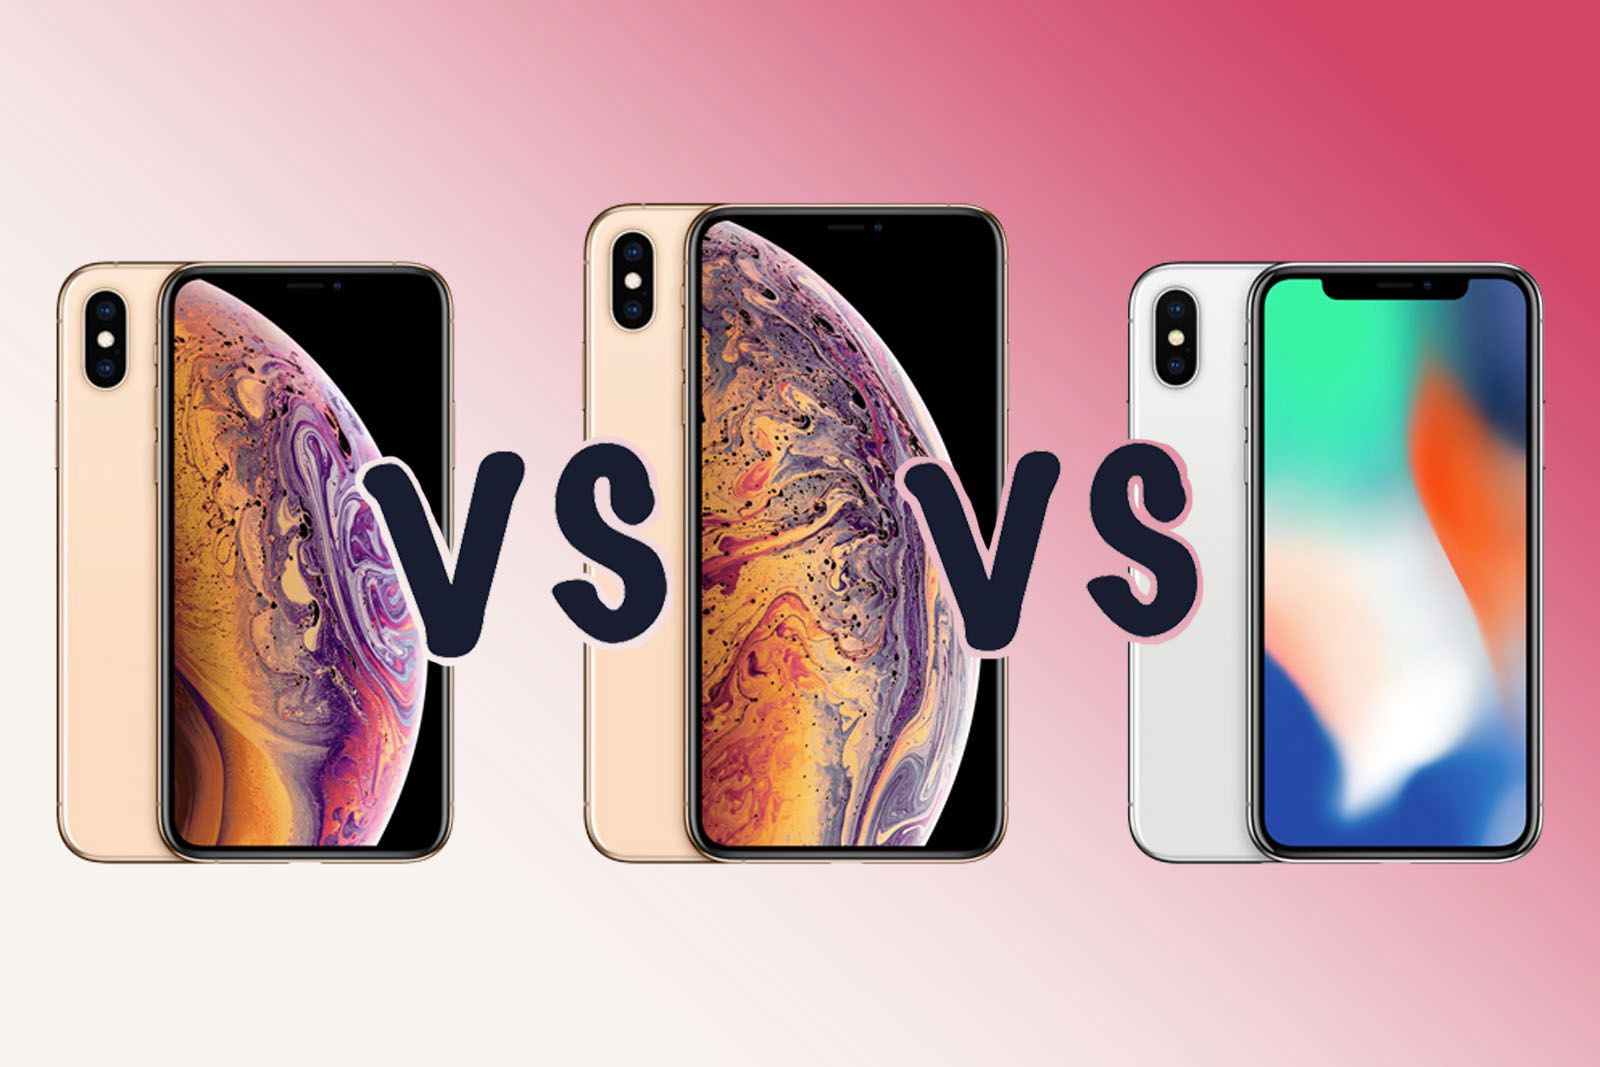 Apple iPhone XS vs XS Max vs X: What's the difference?